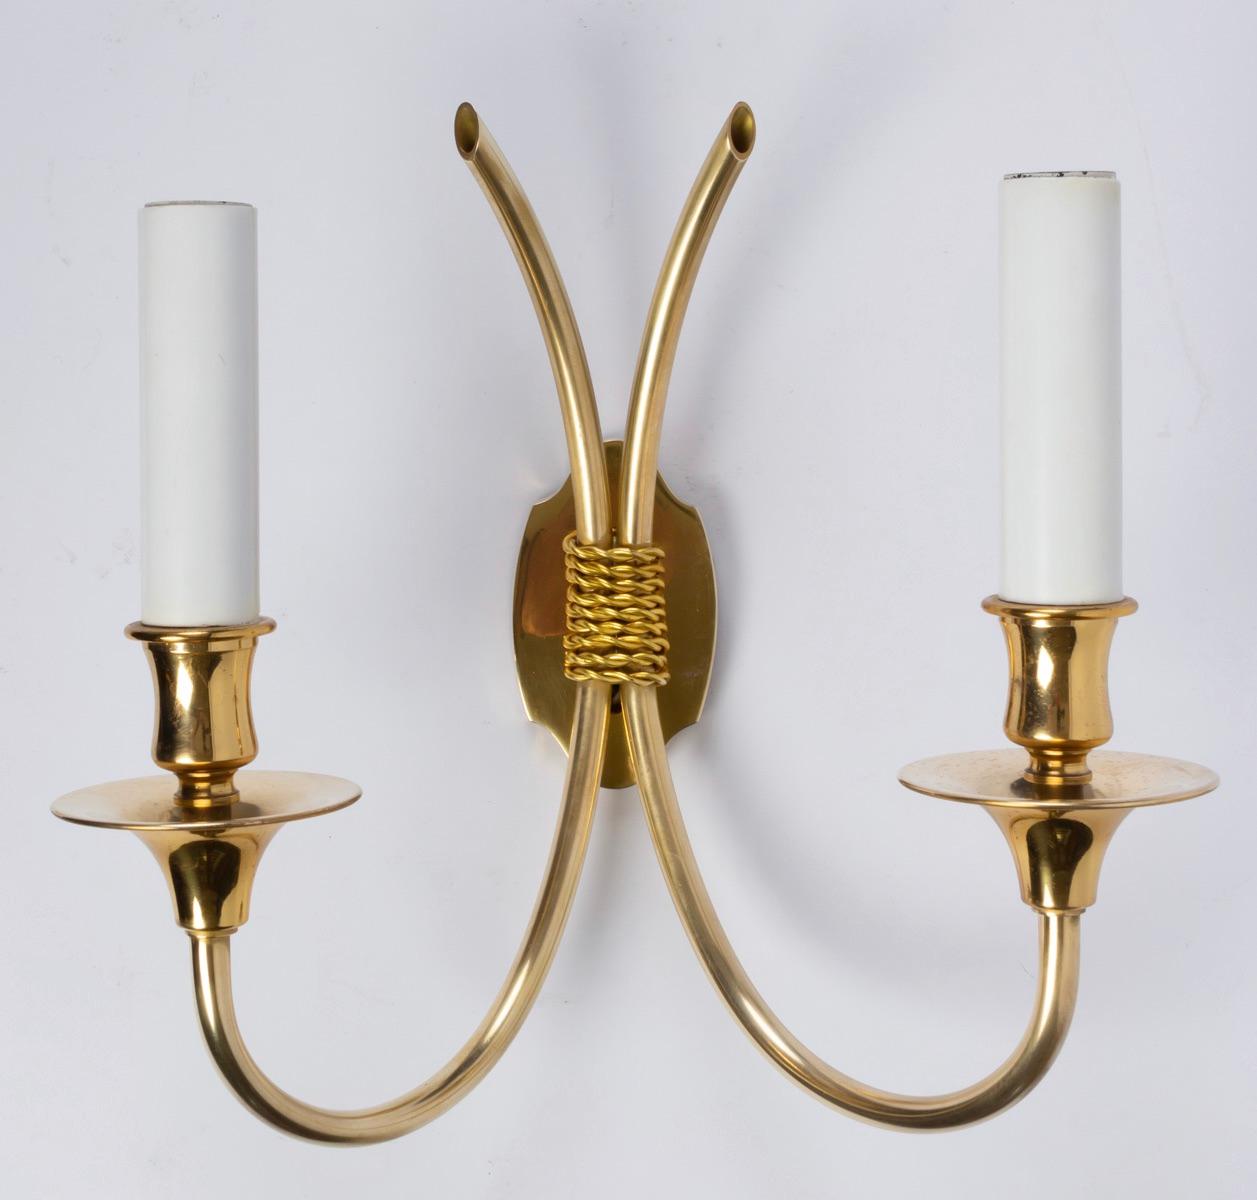 Elegant set of four Maison Honoré gilded brass sconces.
All made of gilded brass each sconce features two curved arms gathered together with brass cord.
The back plate is shield shaped. Two bulbs per sconce.
 